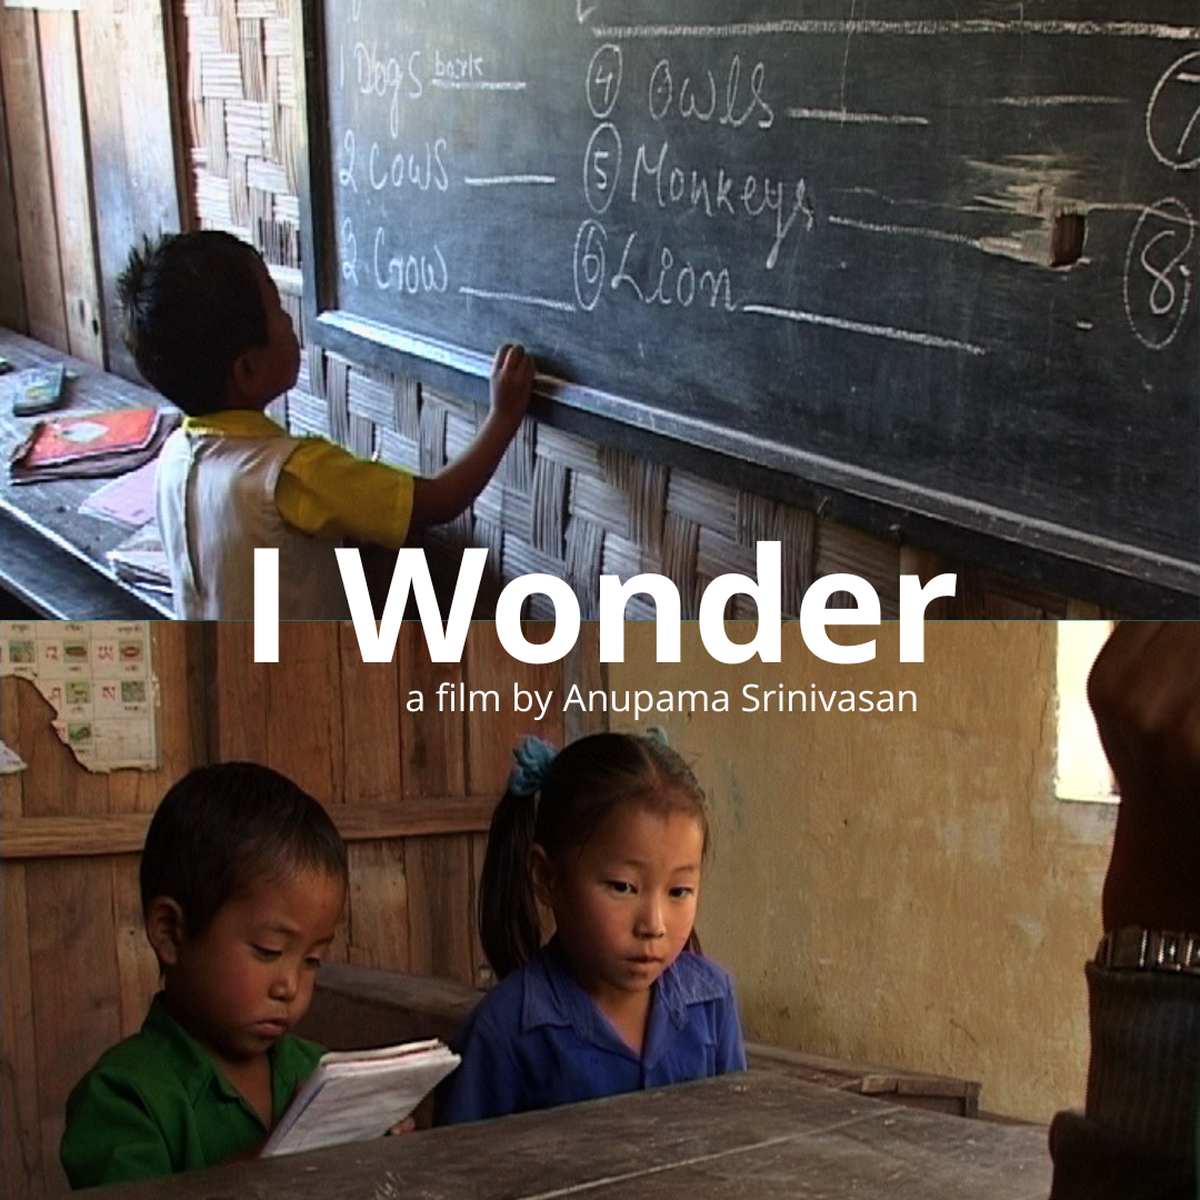 Poster of 'I Wonder', a film being screened at Chalshiksha, an education film festival in Bengaluru from September 23-25, 2022.  